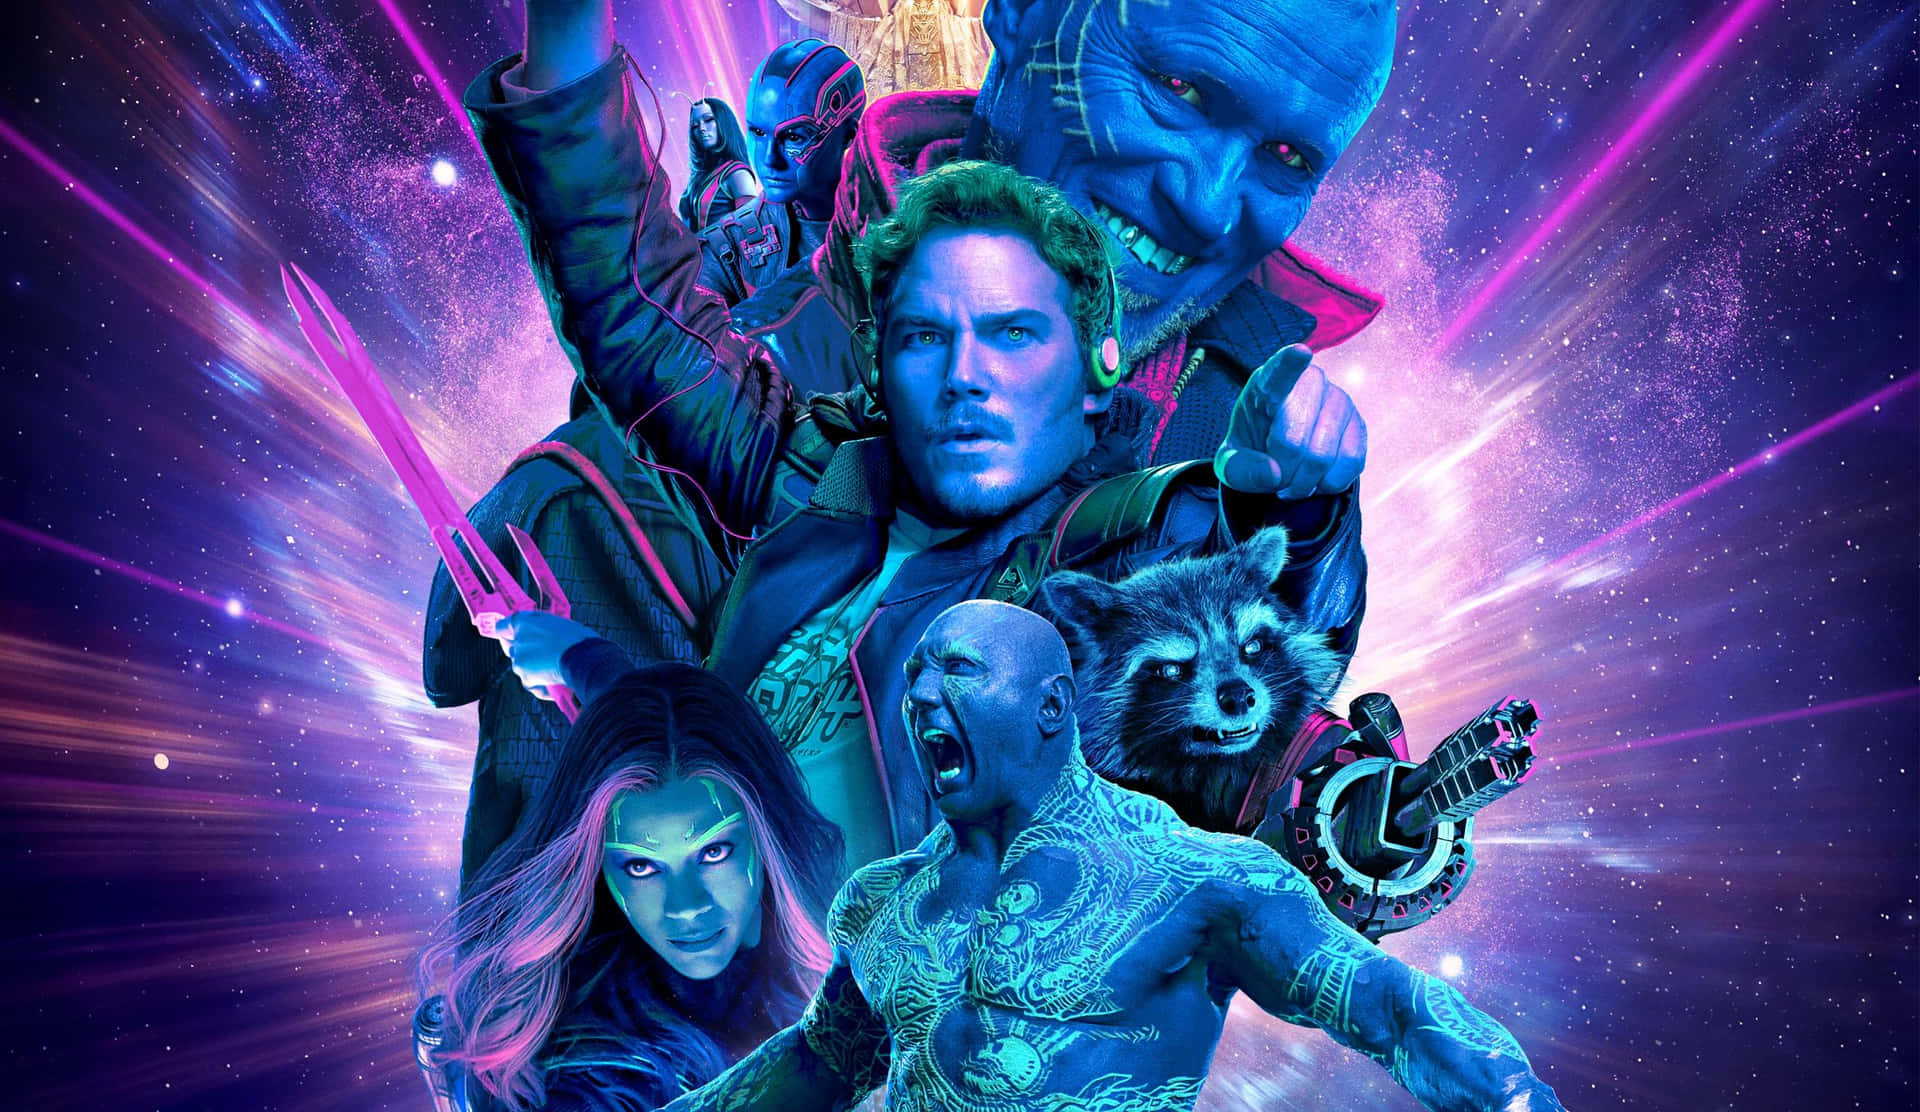 "The Guardians Of The Galaxy Are Back With Star-Studded Action" Wallpaper